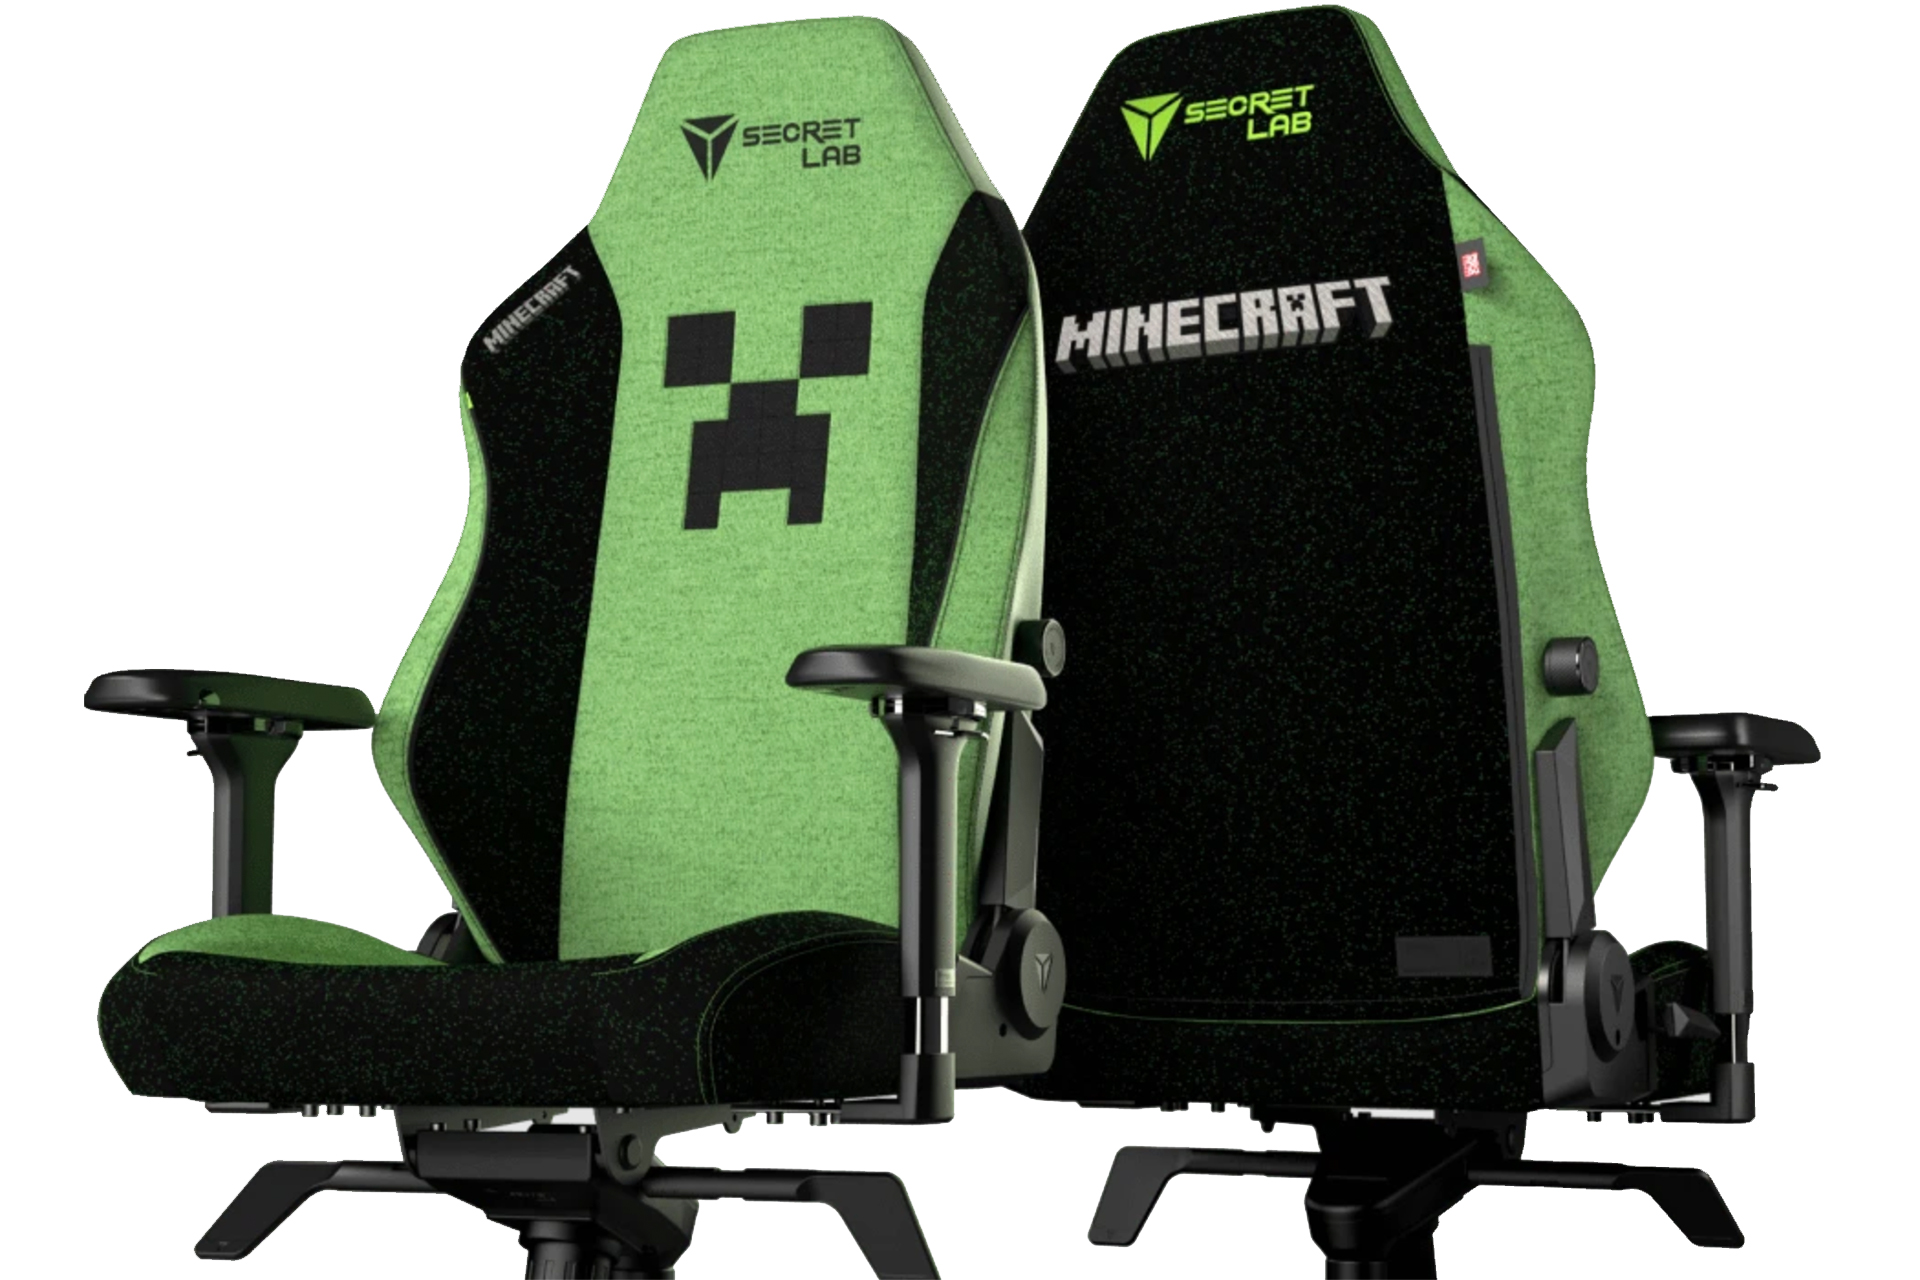 There’s now an legitimate ‘Minecraft’ gaming chair